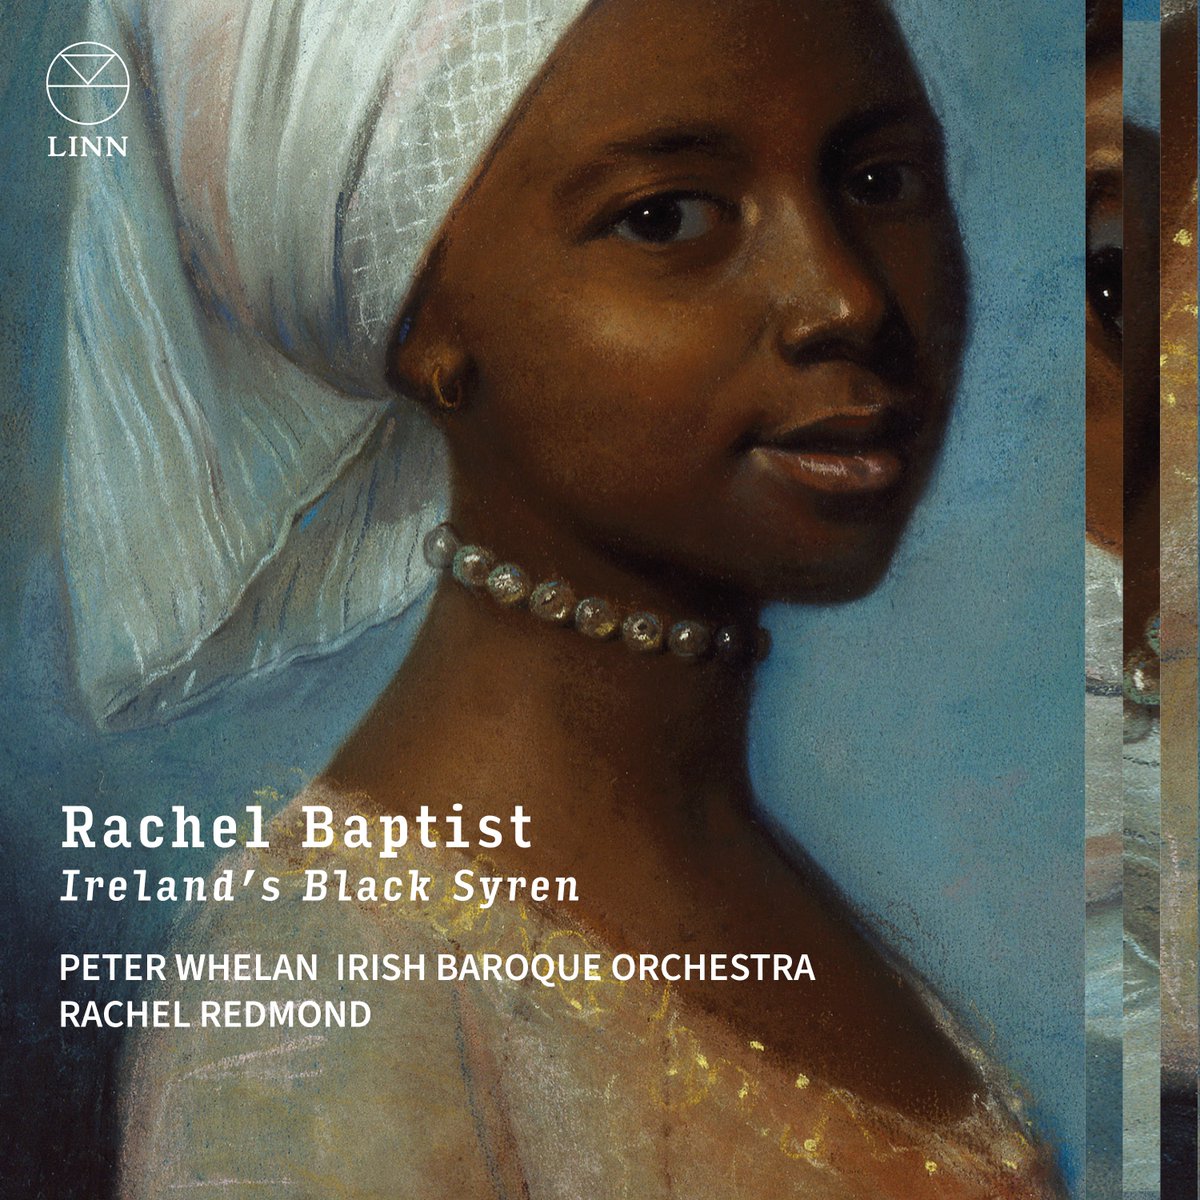 ‘Samson, HWV 57, Sinfonia: I. Andante’ by @IrishBaroque is the first single from the upcoming album ‘Rachel Baptist: Ireland’s Black Syren’ with Peter Whelan and soprano Rachel Redmond. ᐅ Stream or purchase this first single and pre-order the album now: lnk.to/RachelBaptistTW